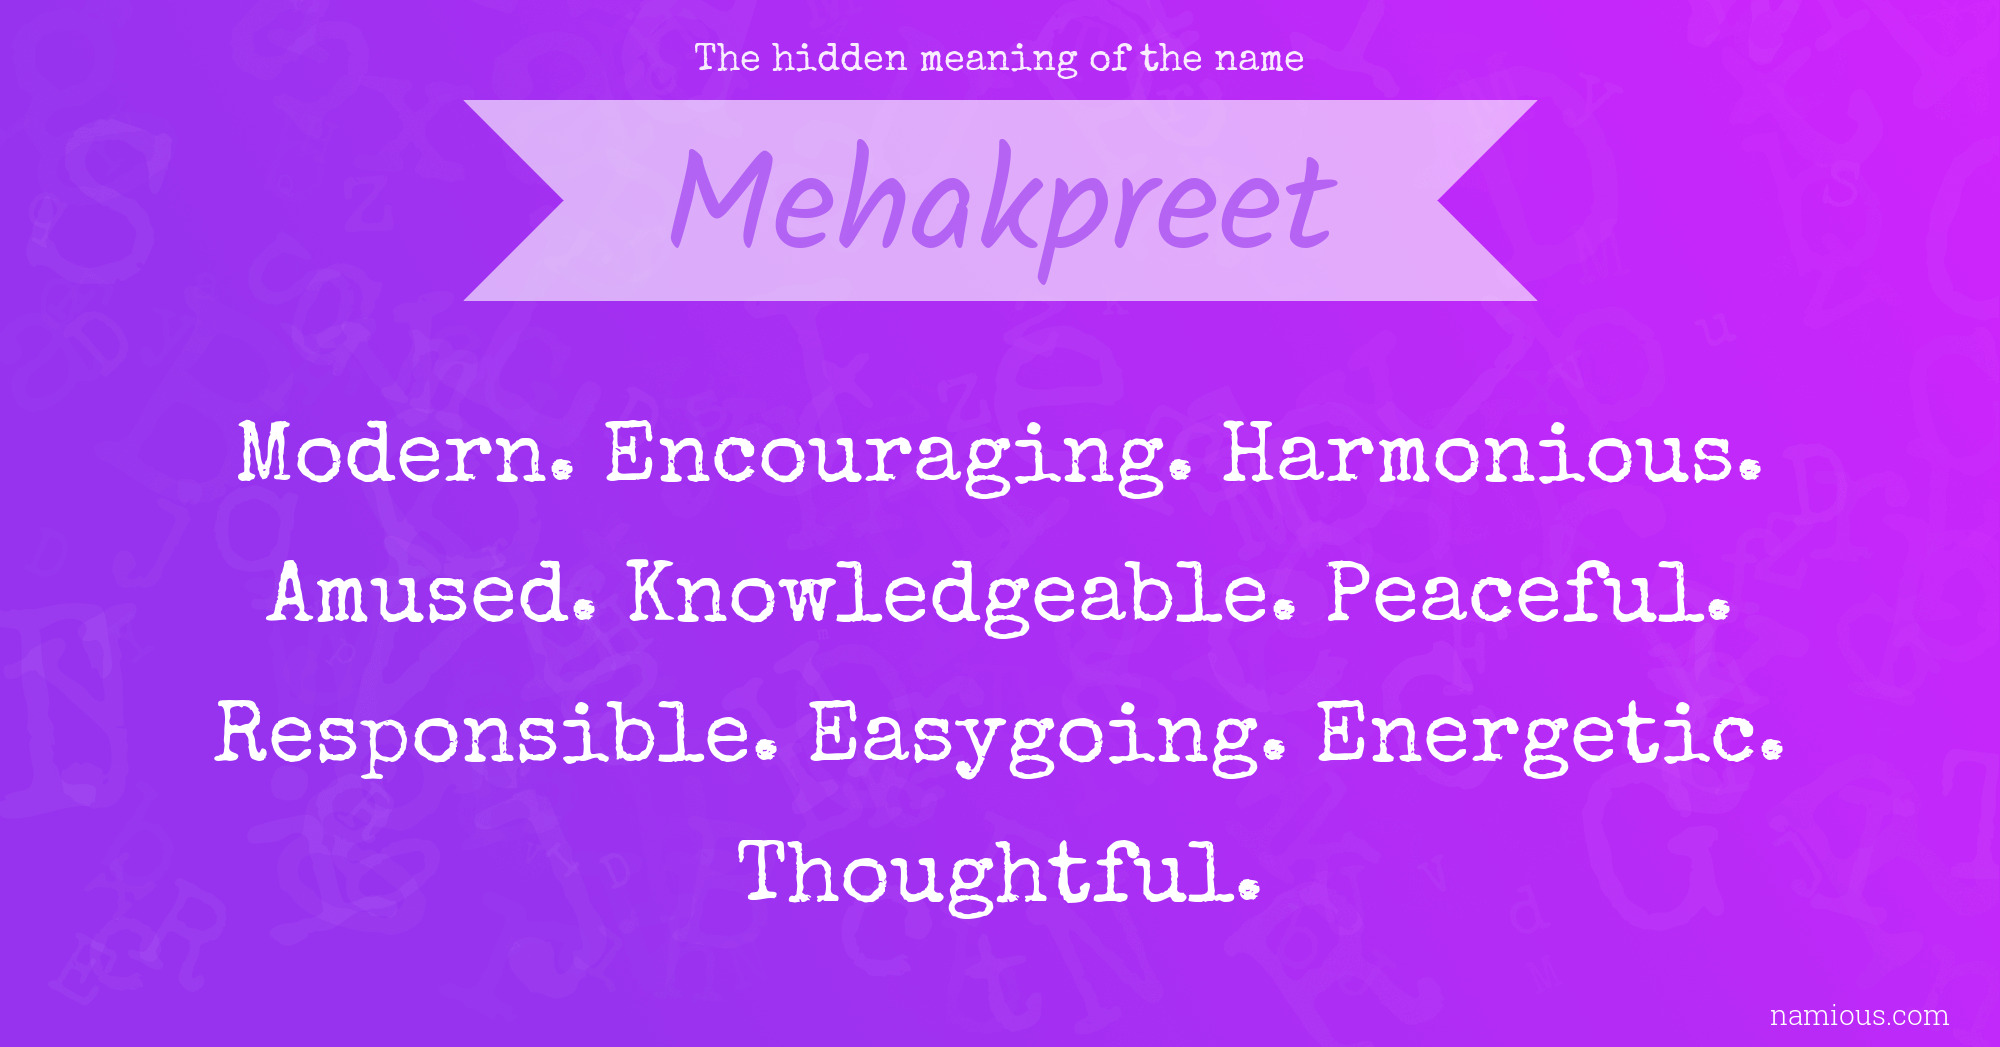 The hidden meaning of the name Mehakpreet